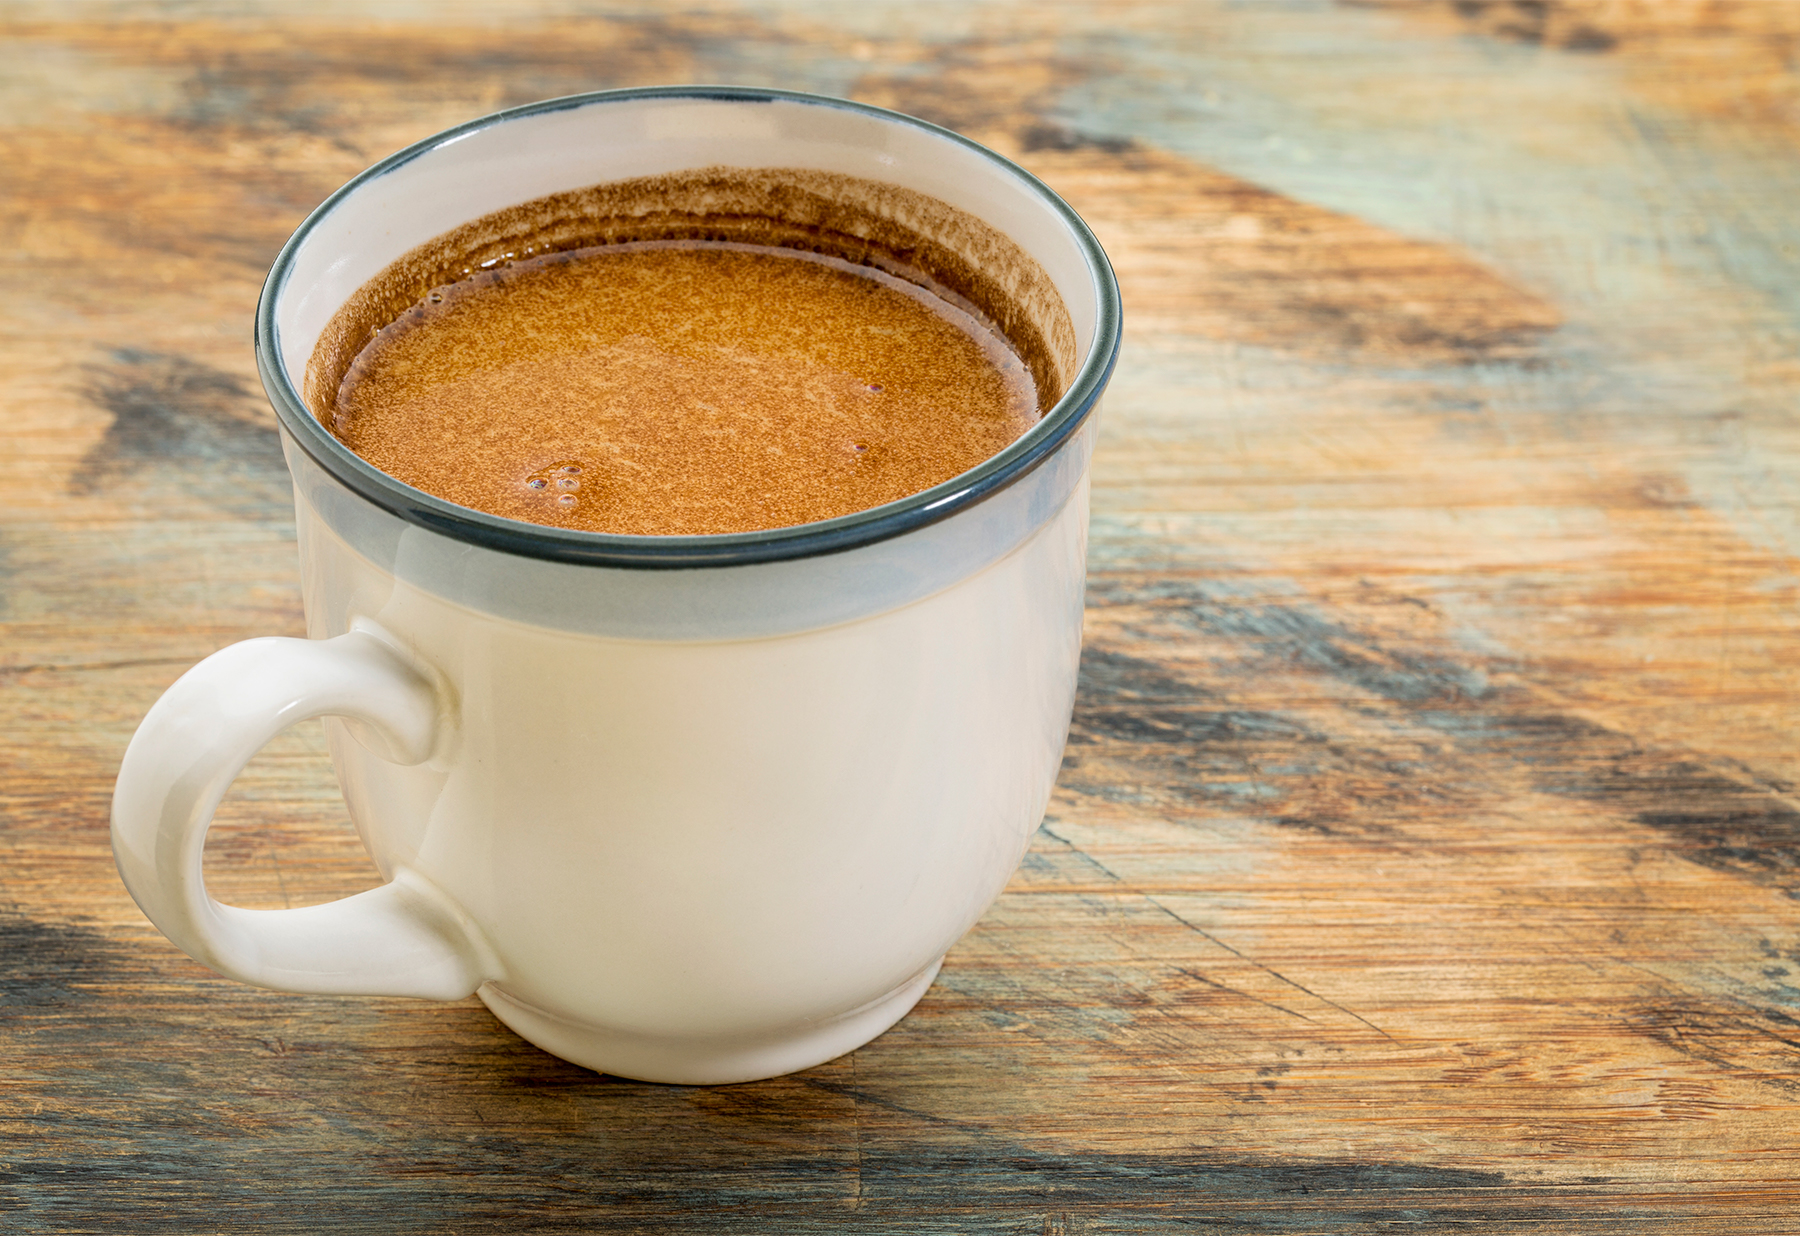 Healthy Coffee: 9 Superfoods That Add a Boost to Your Cup | Greatist